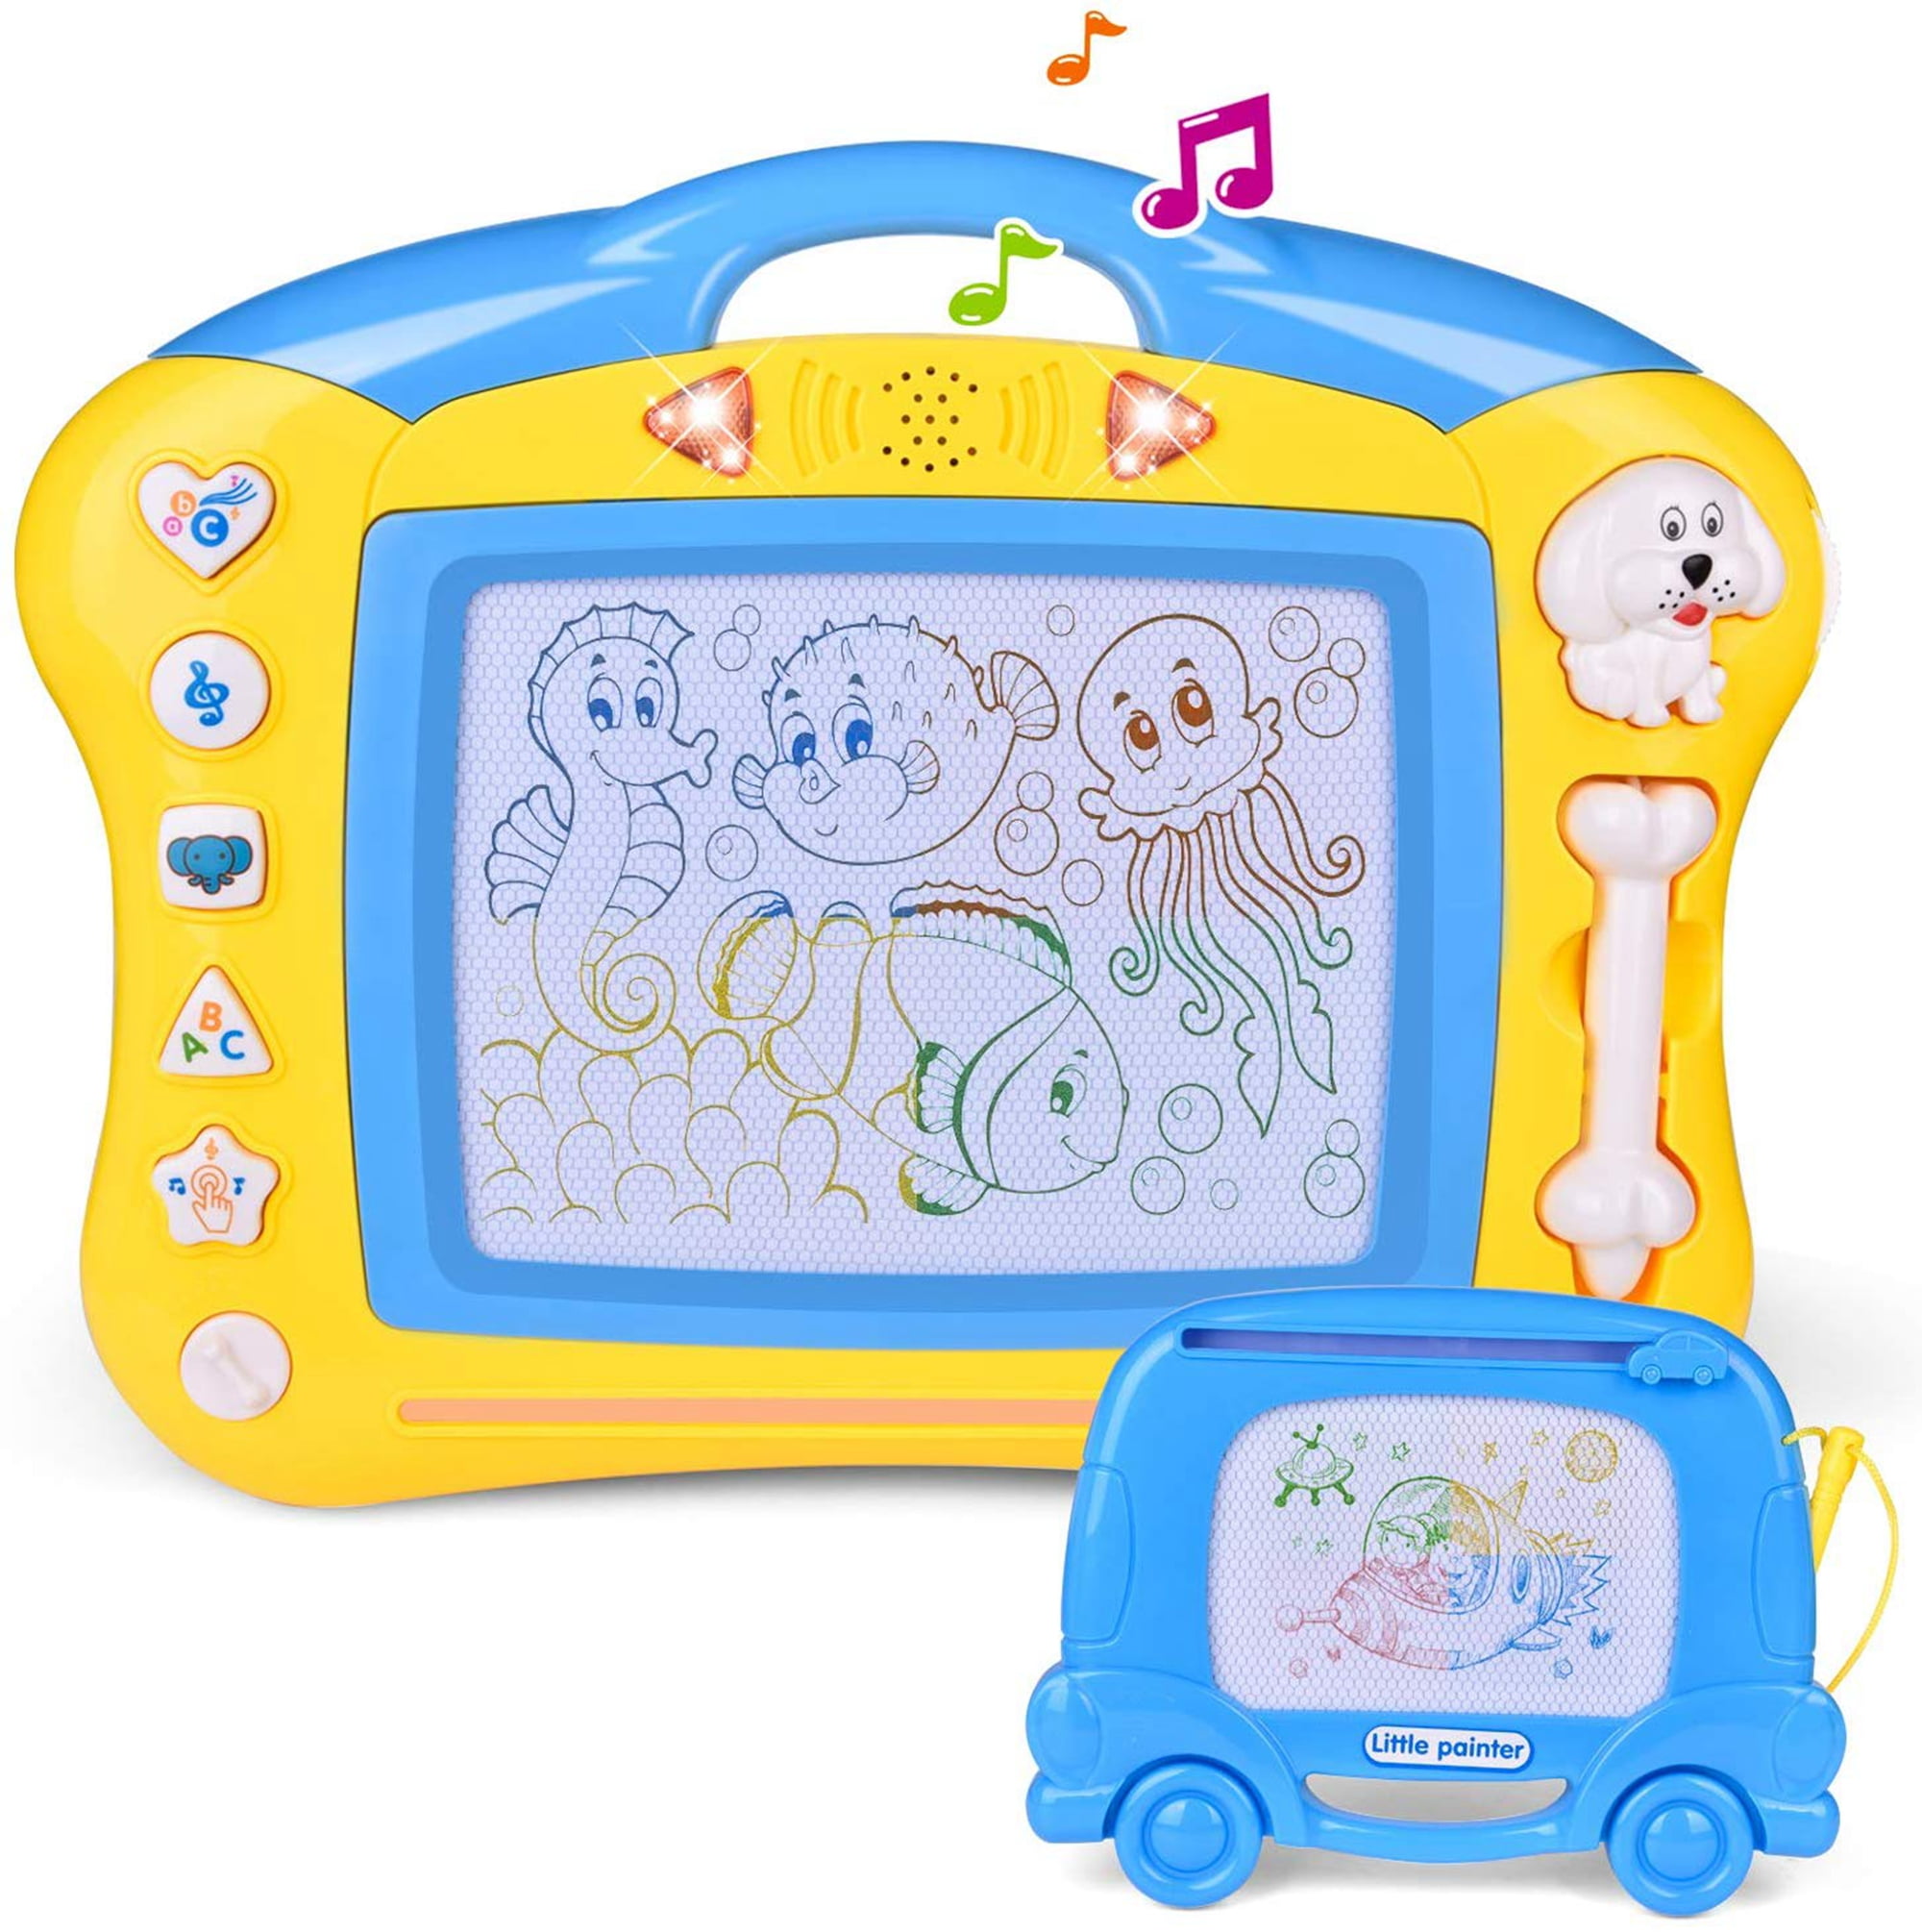 Vtech Baby Tiny Touch Tablet learn ABCs Through a Happy Sing-along Song 